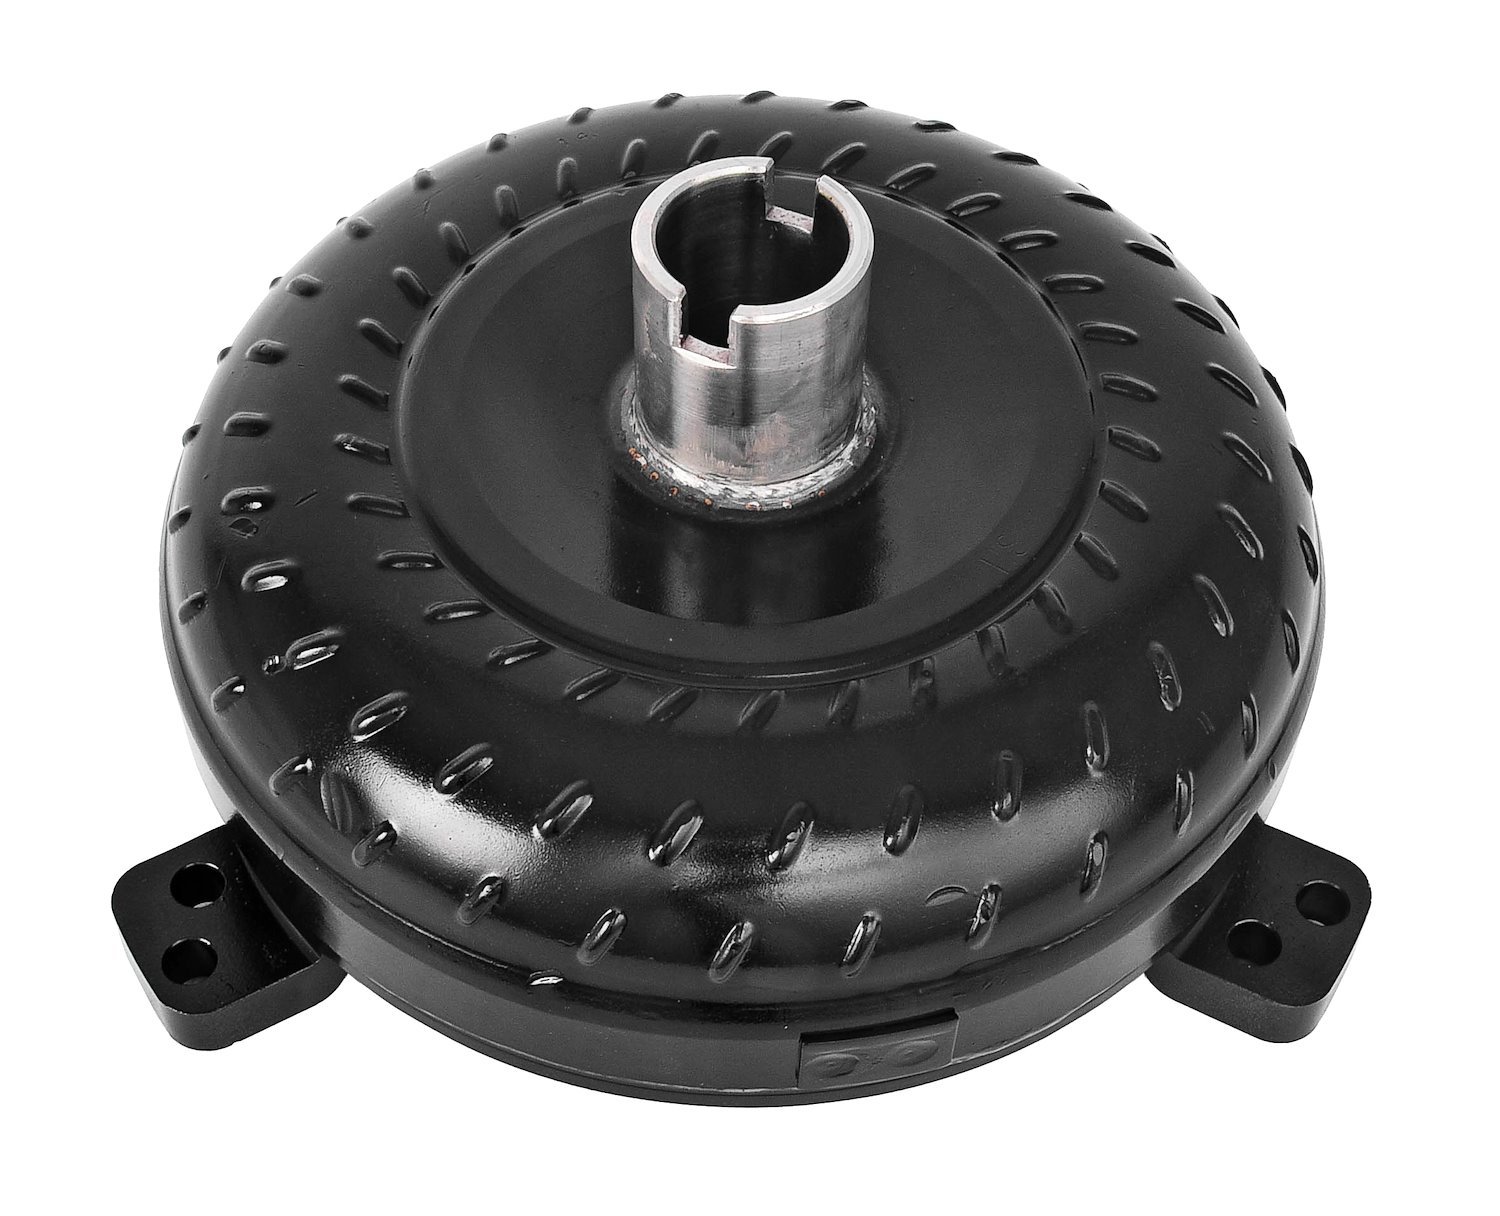 XHD Torque Converter for GM TH350/TH400/Powerglide [2900-3200 RPM Stall Speed]